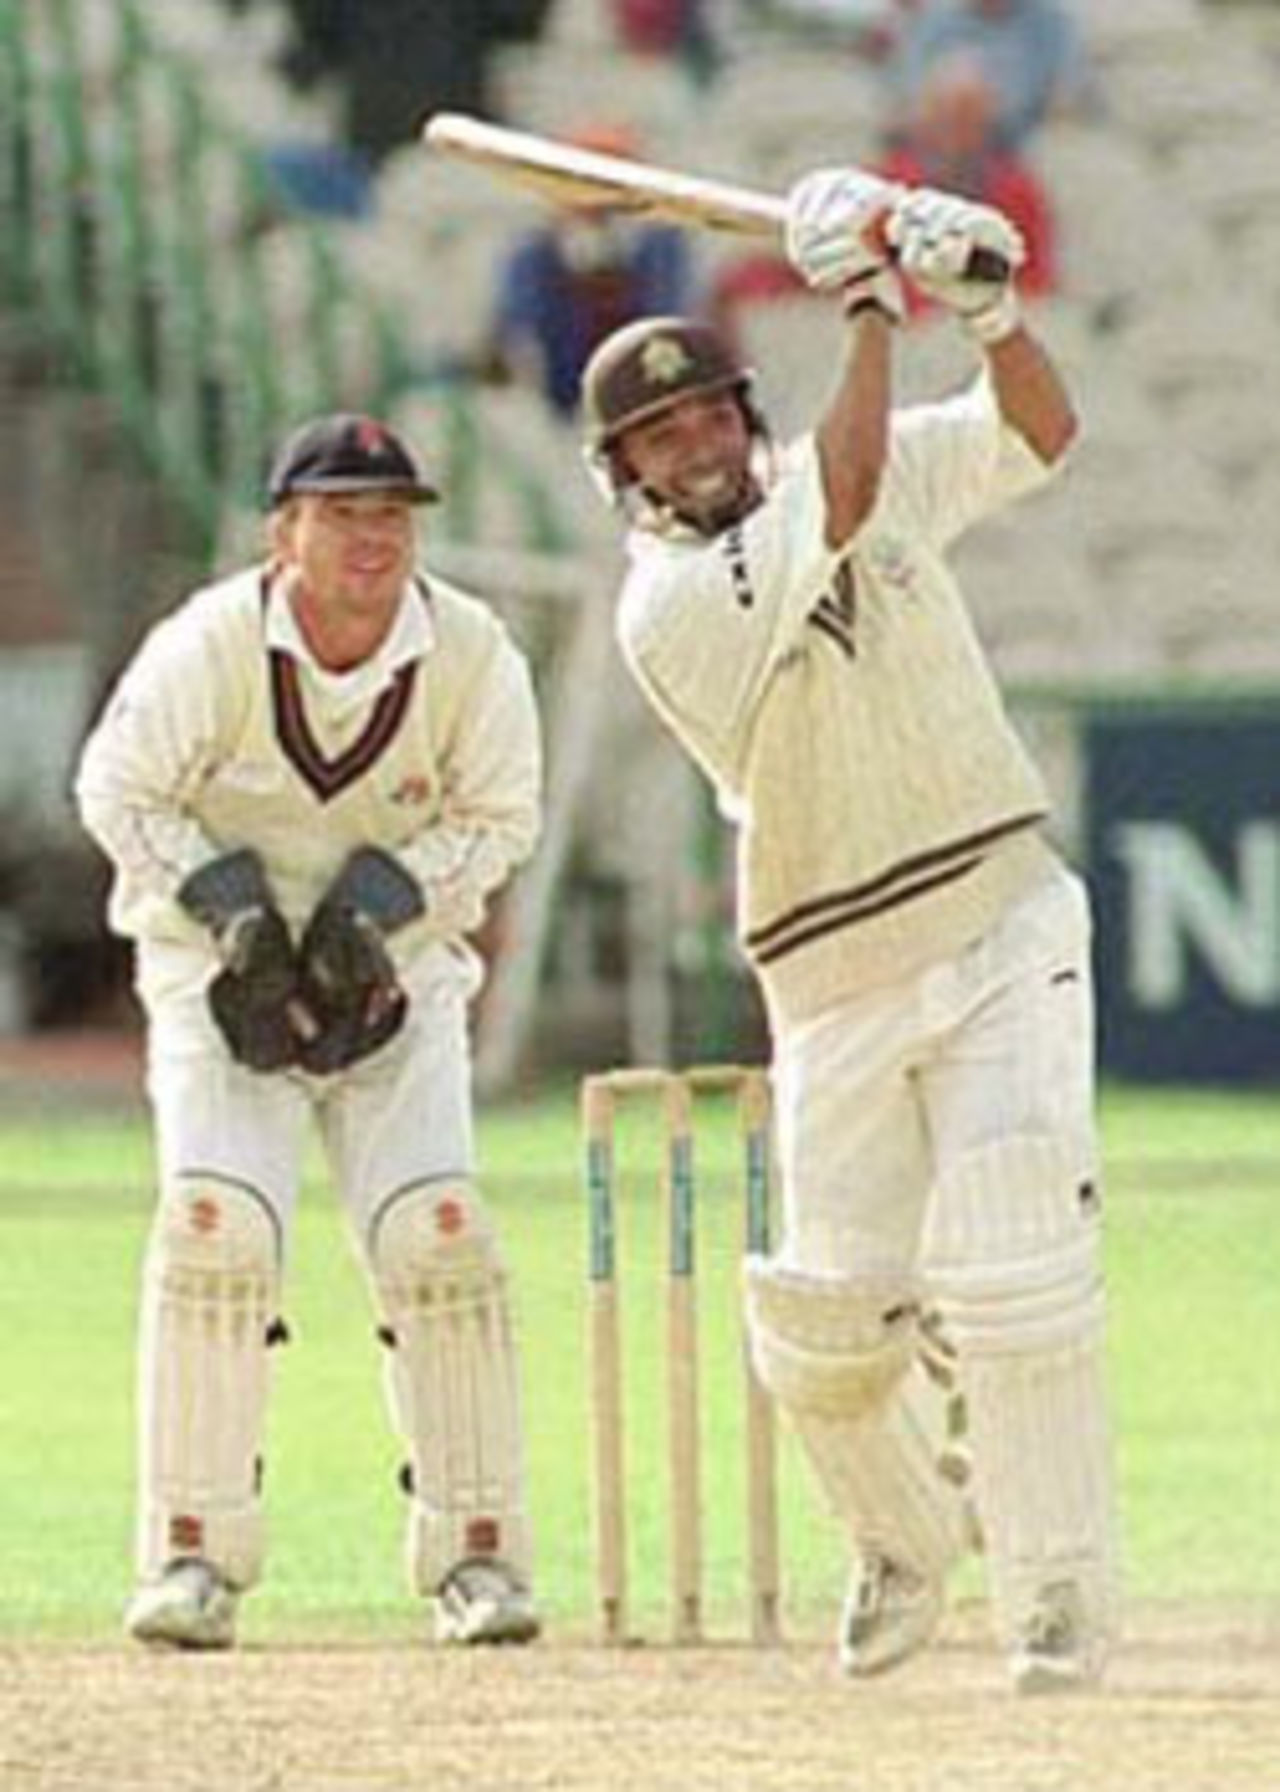 Gary Butcher hits out as warren Hegg looks on, PPP healthcare County Championship Division One, 2000, Lancashire v Surrey, Old Trafford, Manchester, 13-16 September 2000(Day 2).